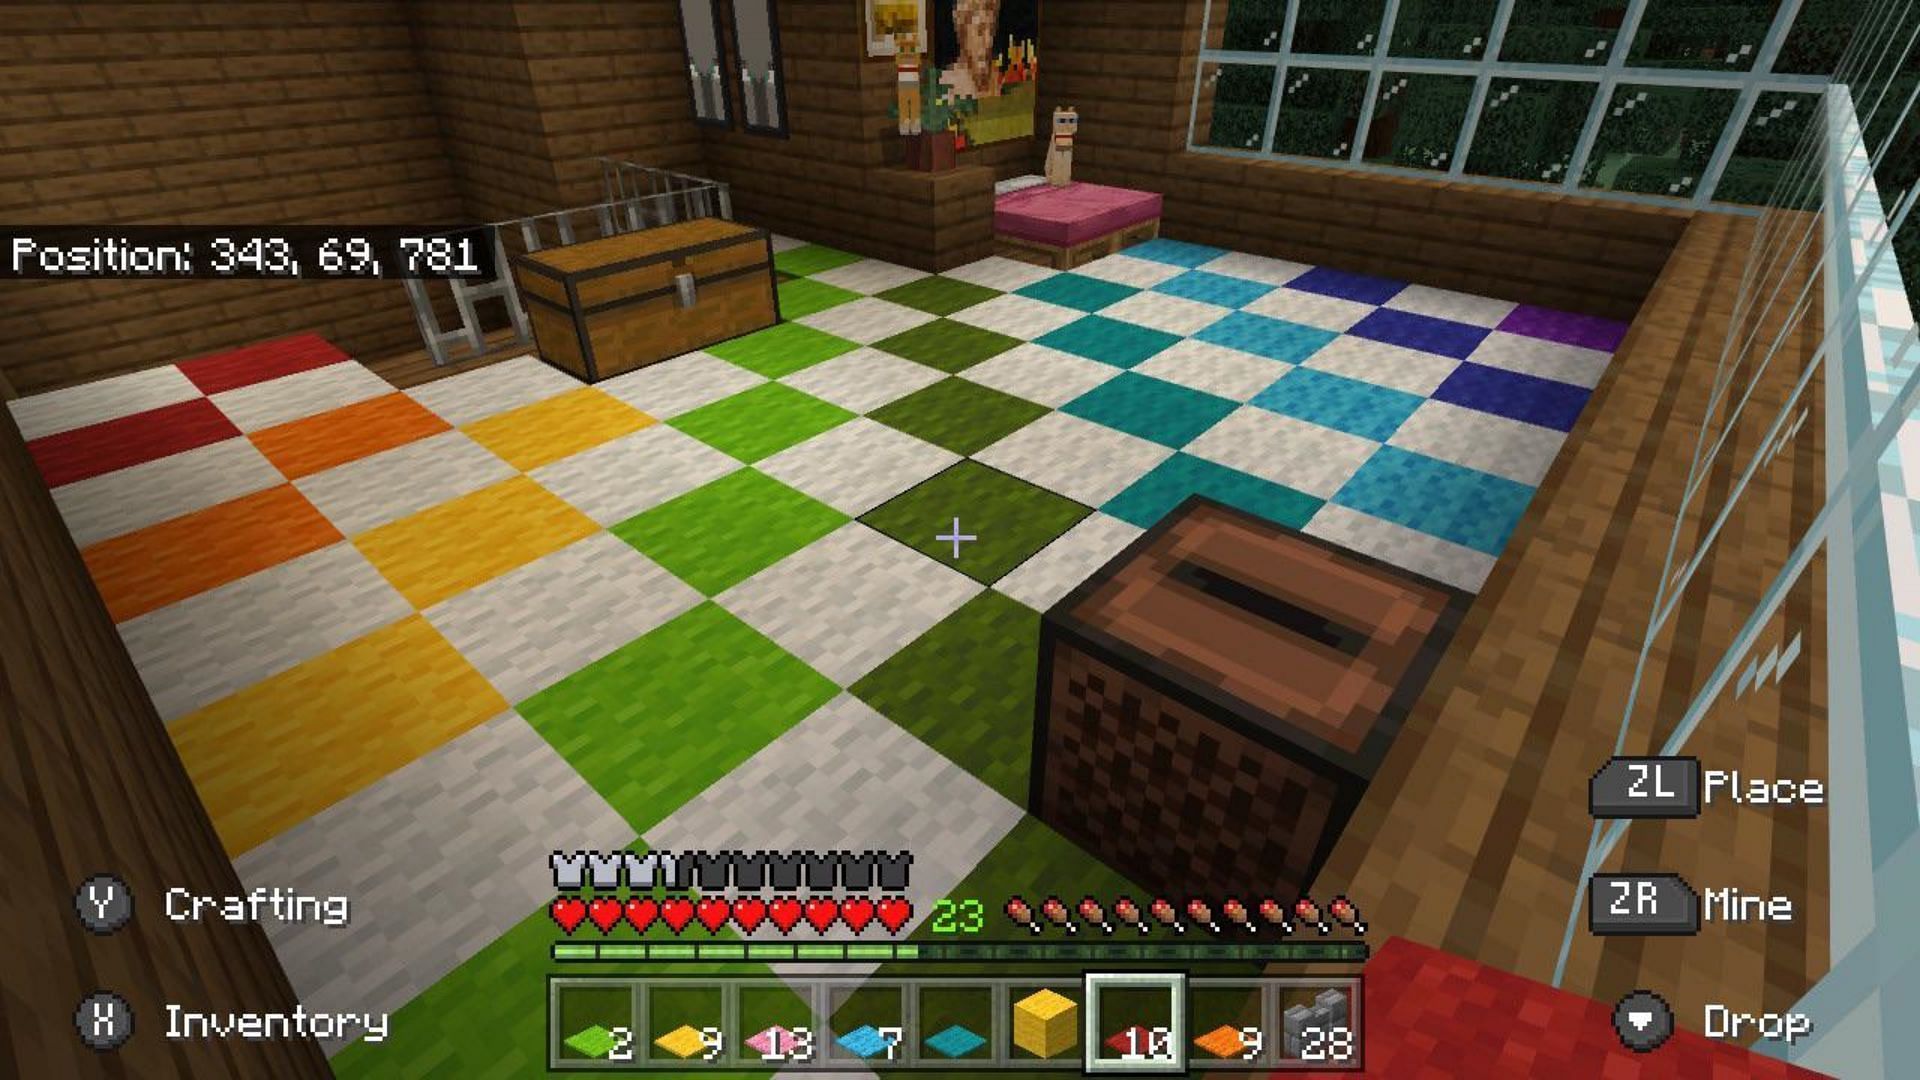 Carpets can be placed in large indoor areas to decorate floors in Minecraft 1.19 (Image via Reddit/u/ckb999)